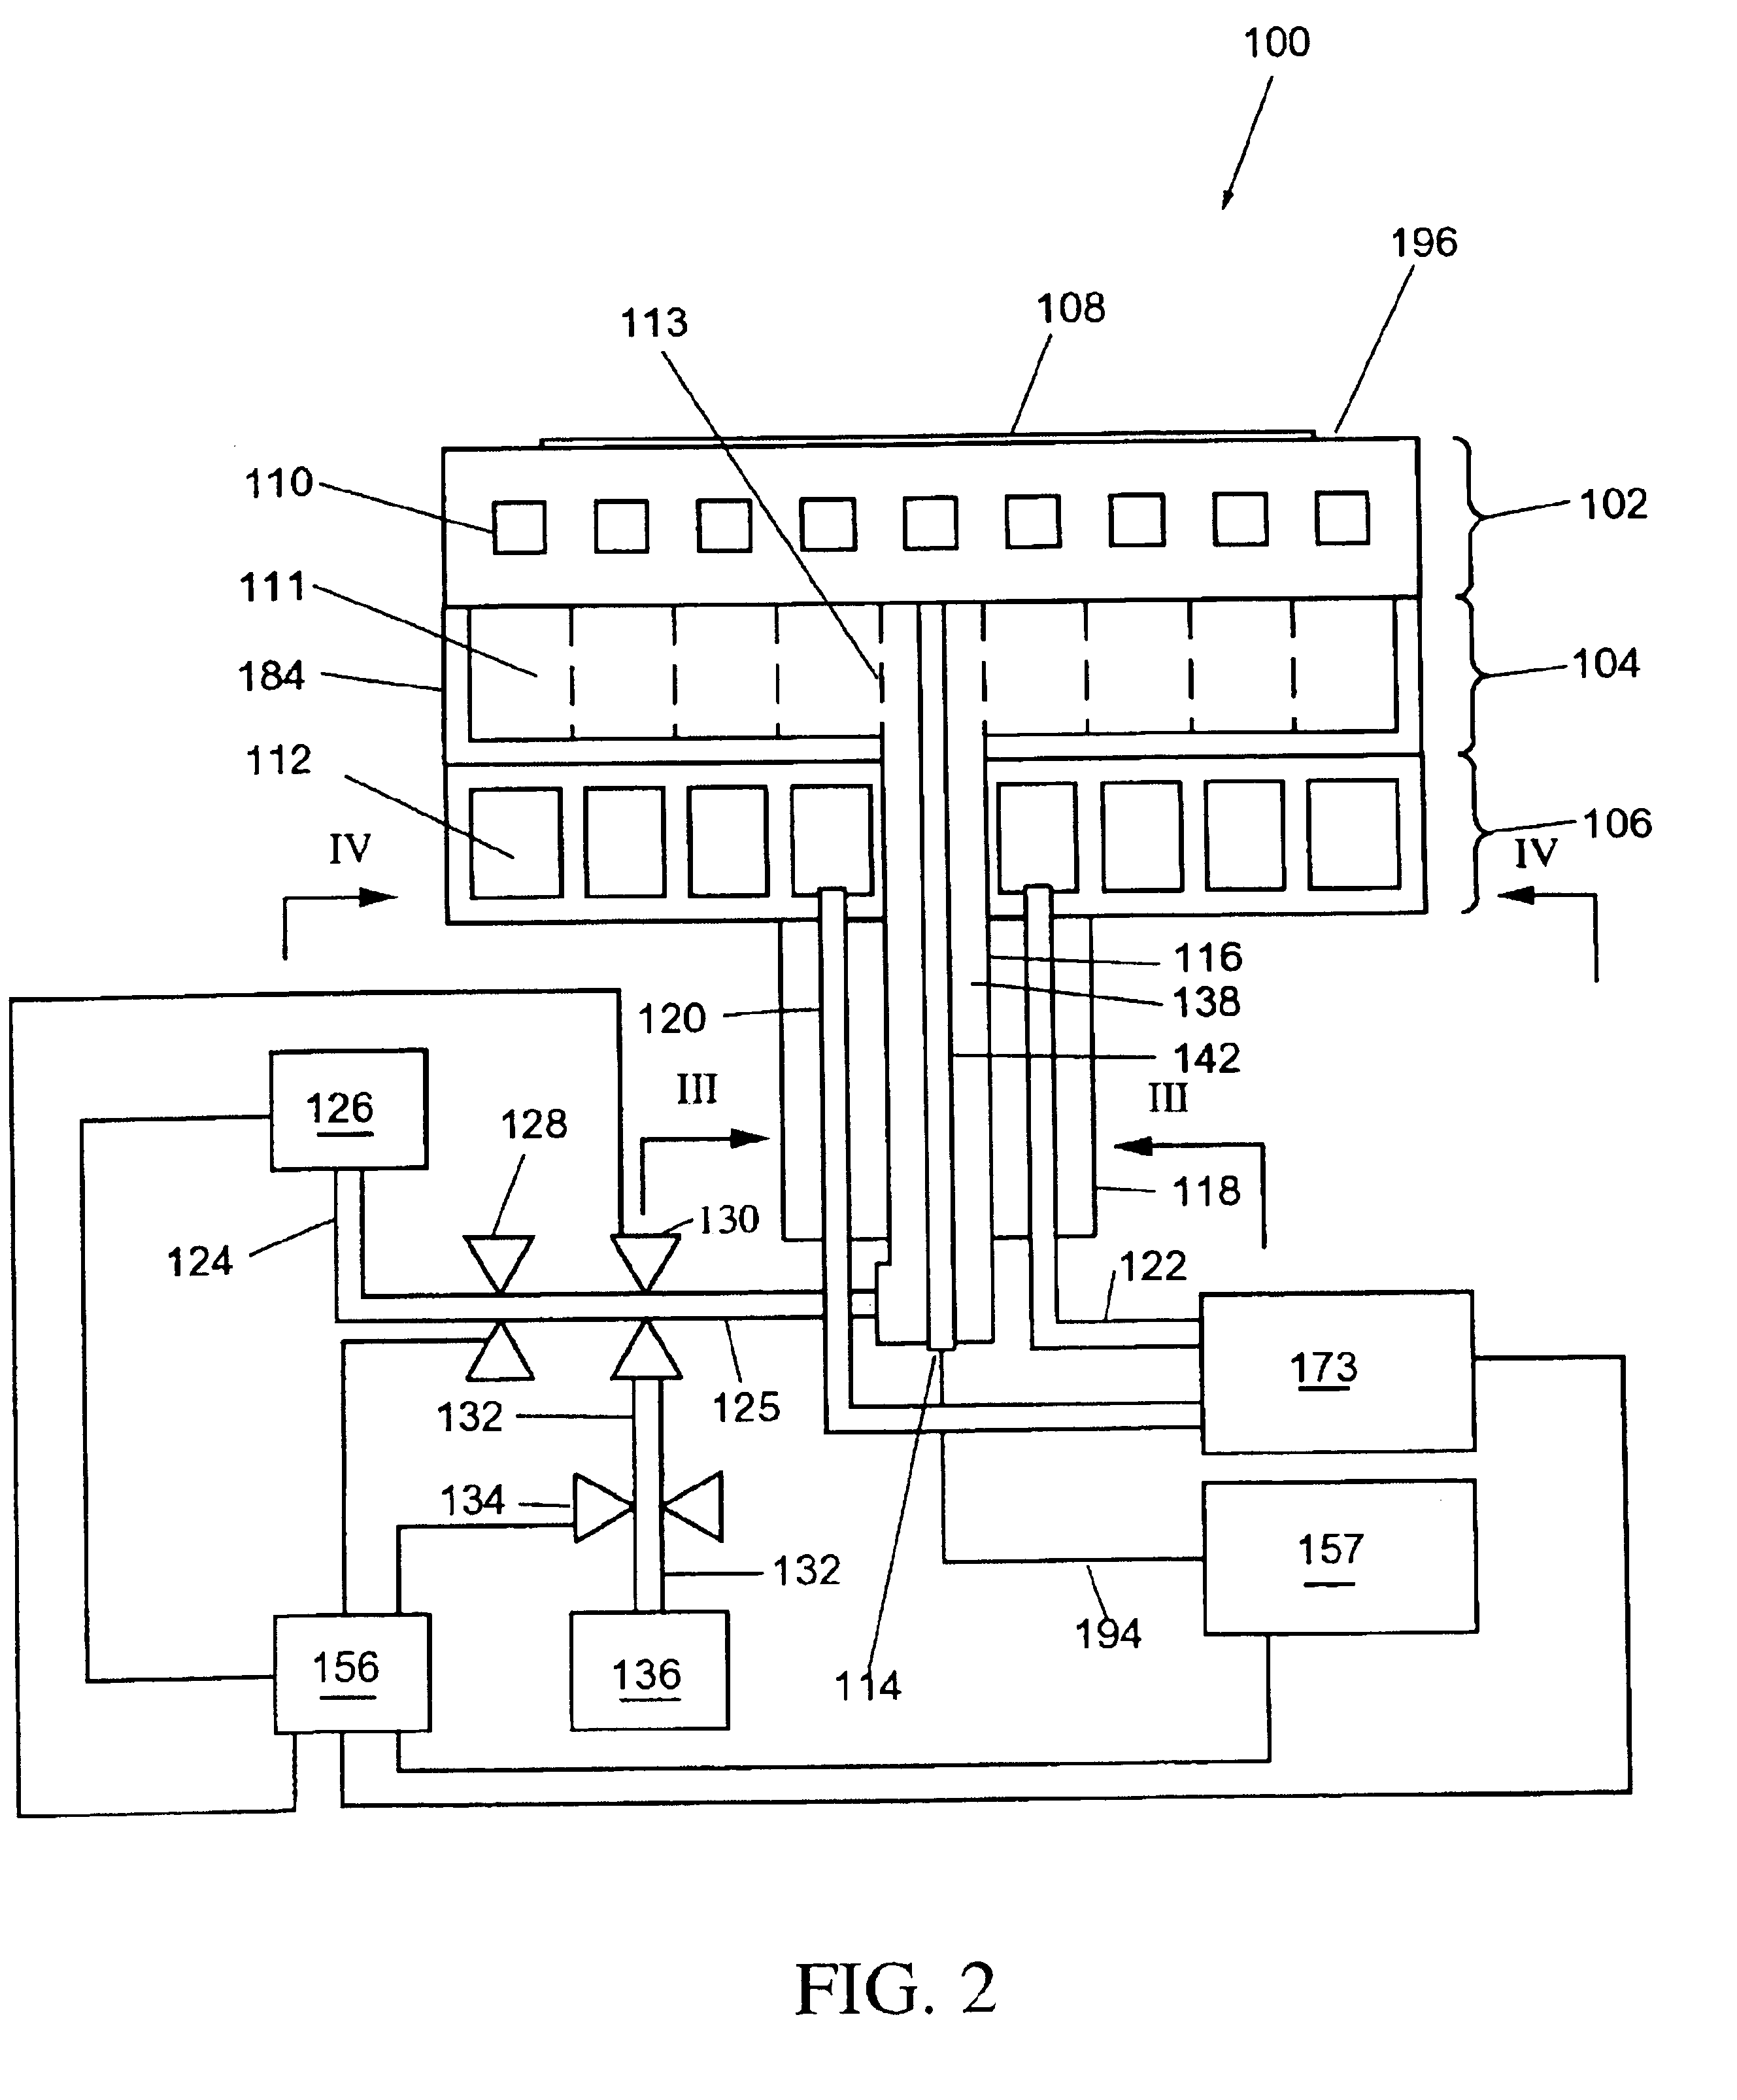 Method and apparatus for active temperature control of susceptors